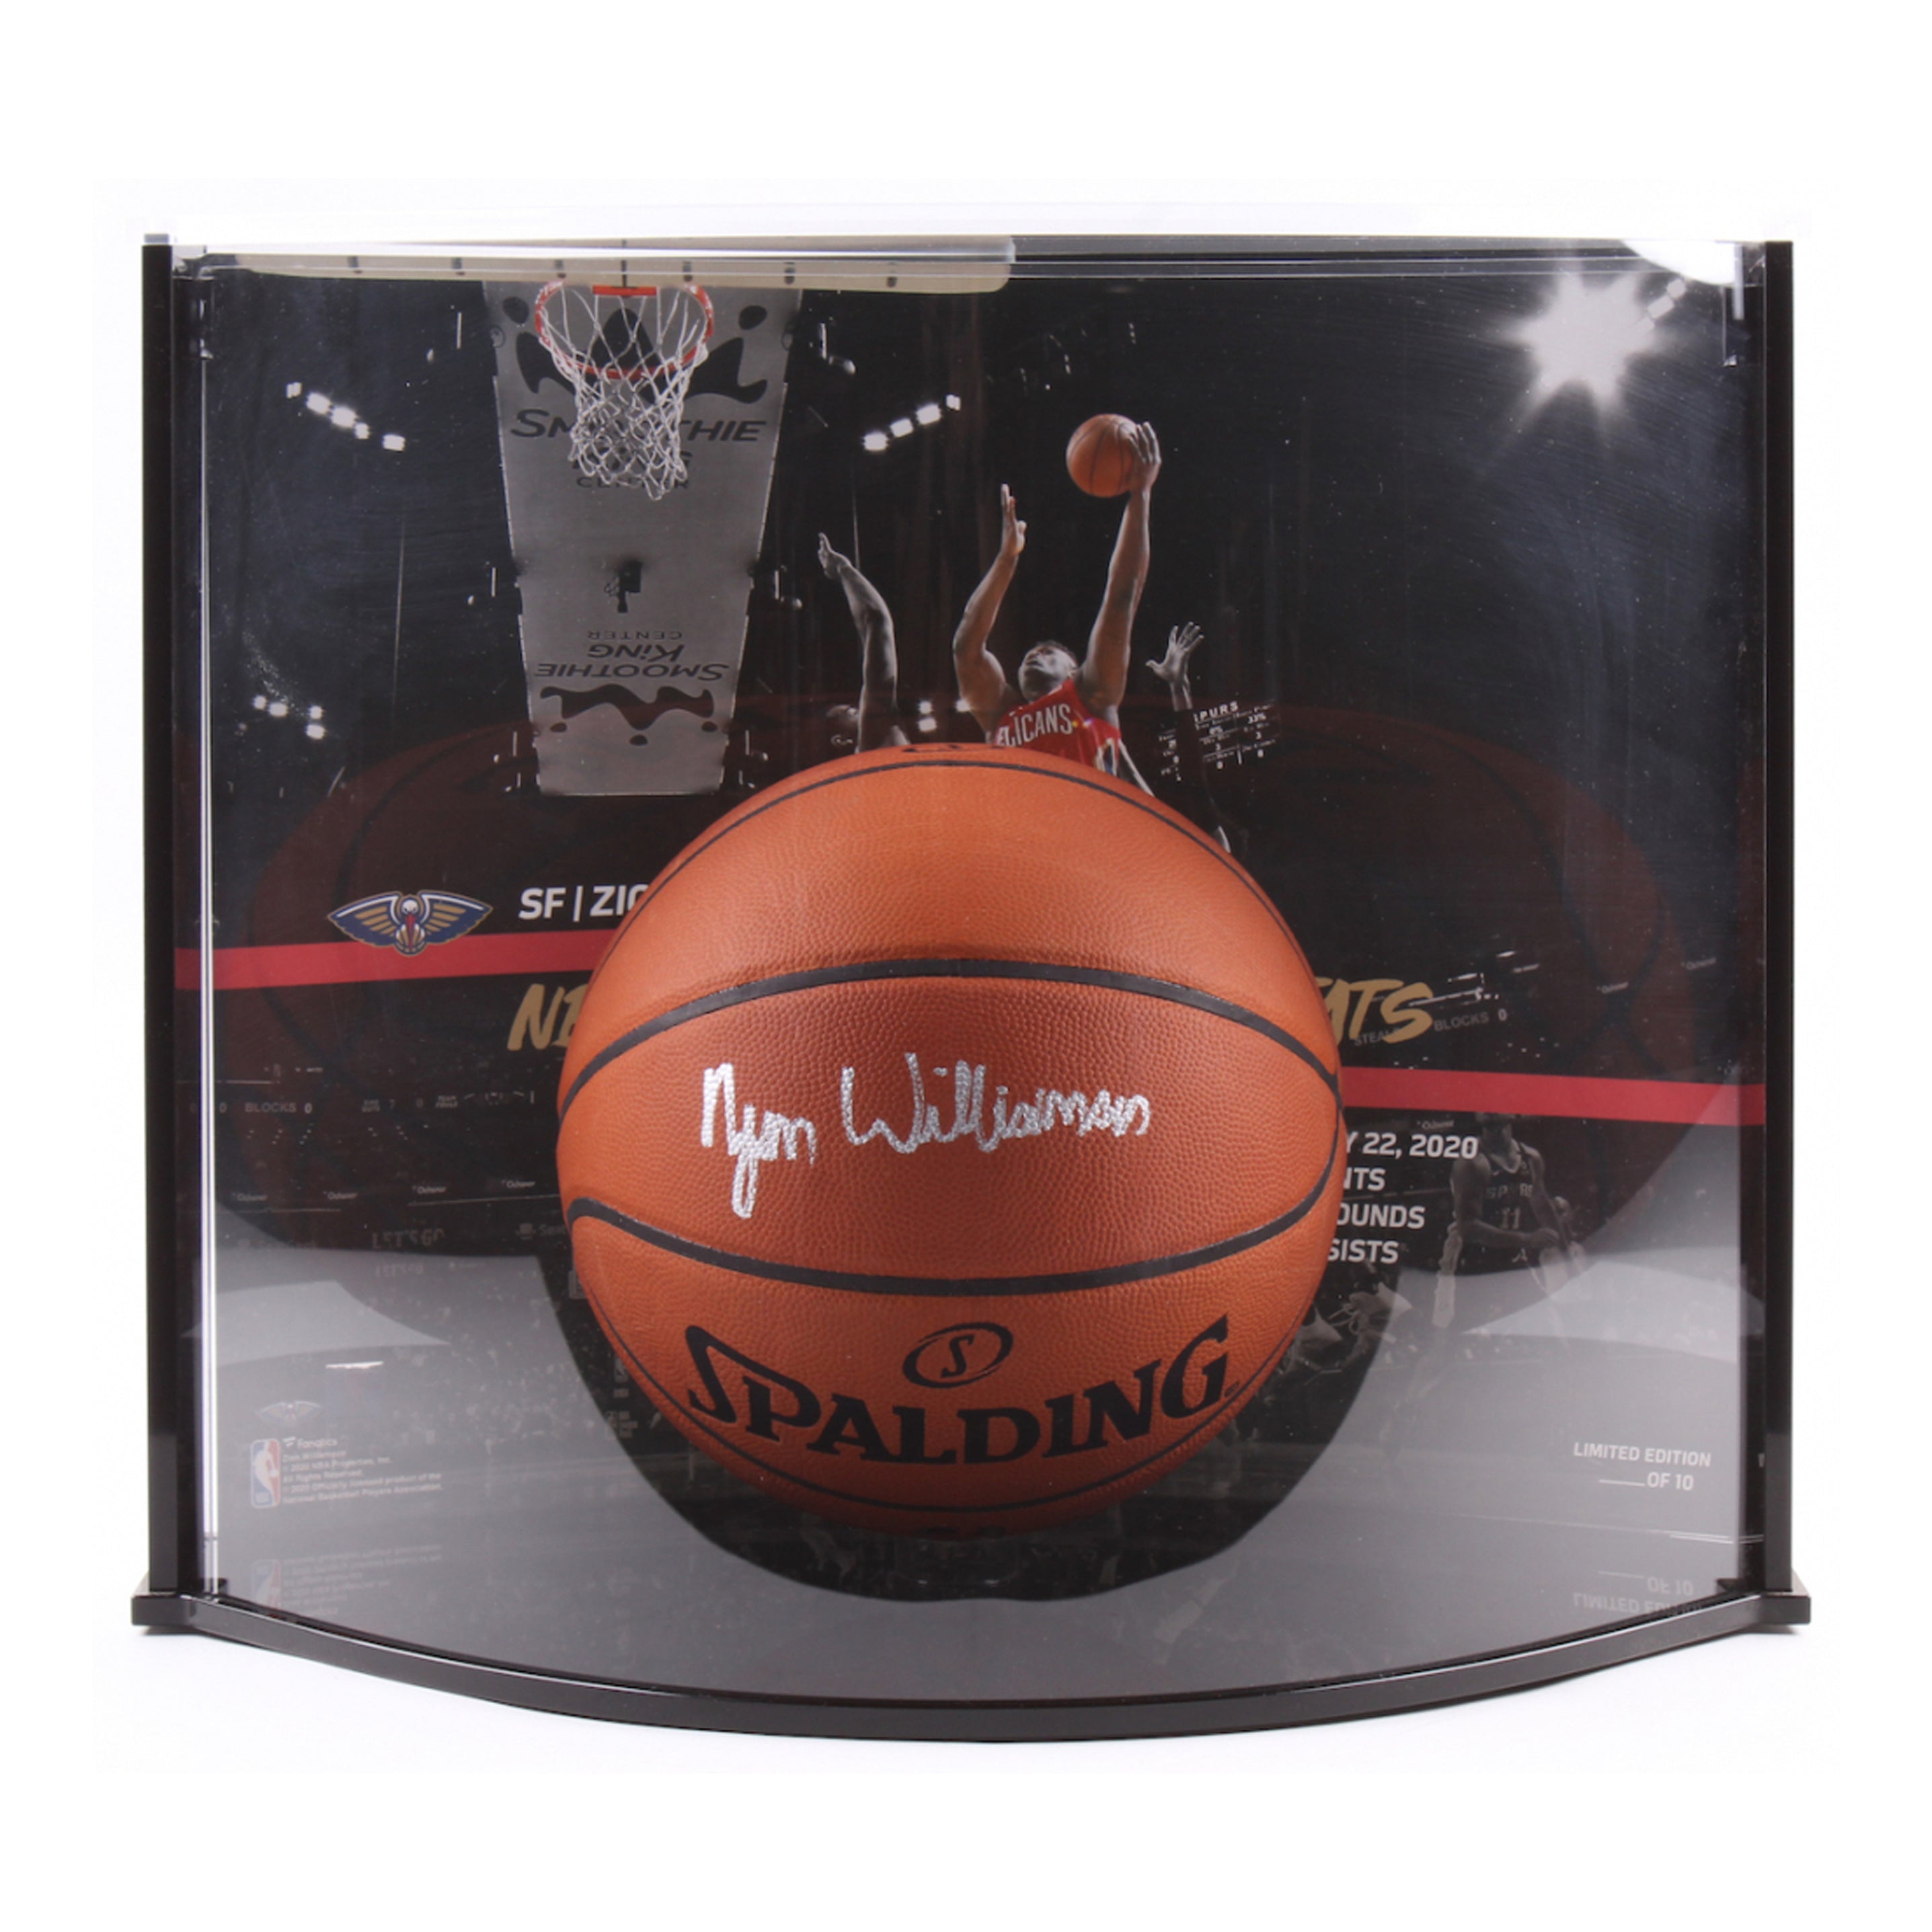 zion-williamson-signed-official-nba-game-ball-series-basketball-with-display-case-limited-edition-fanatics-hologram